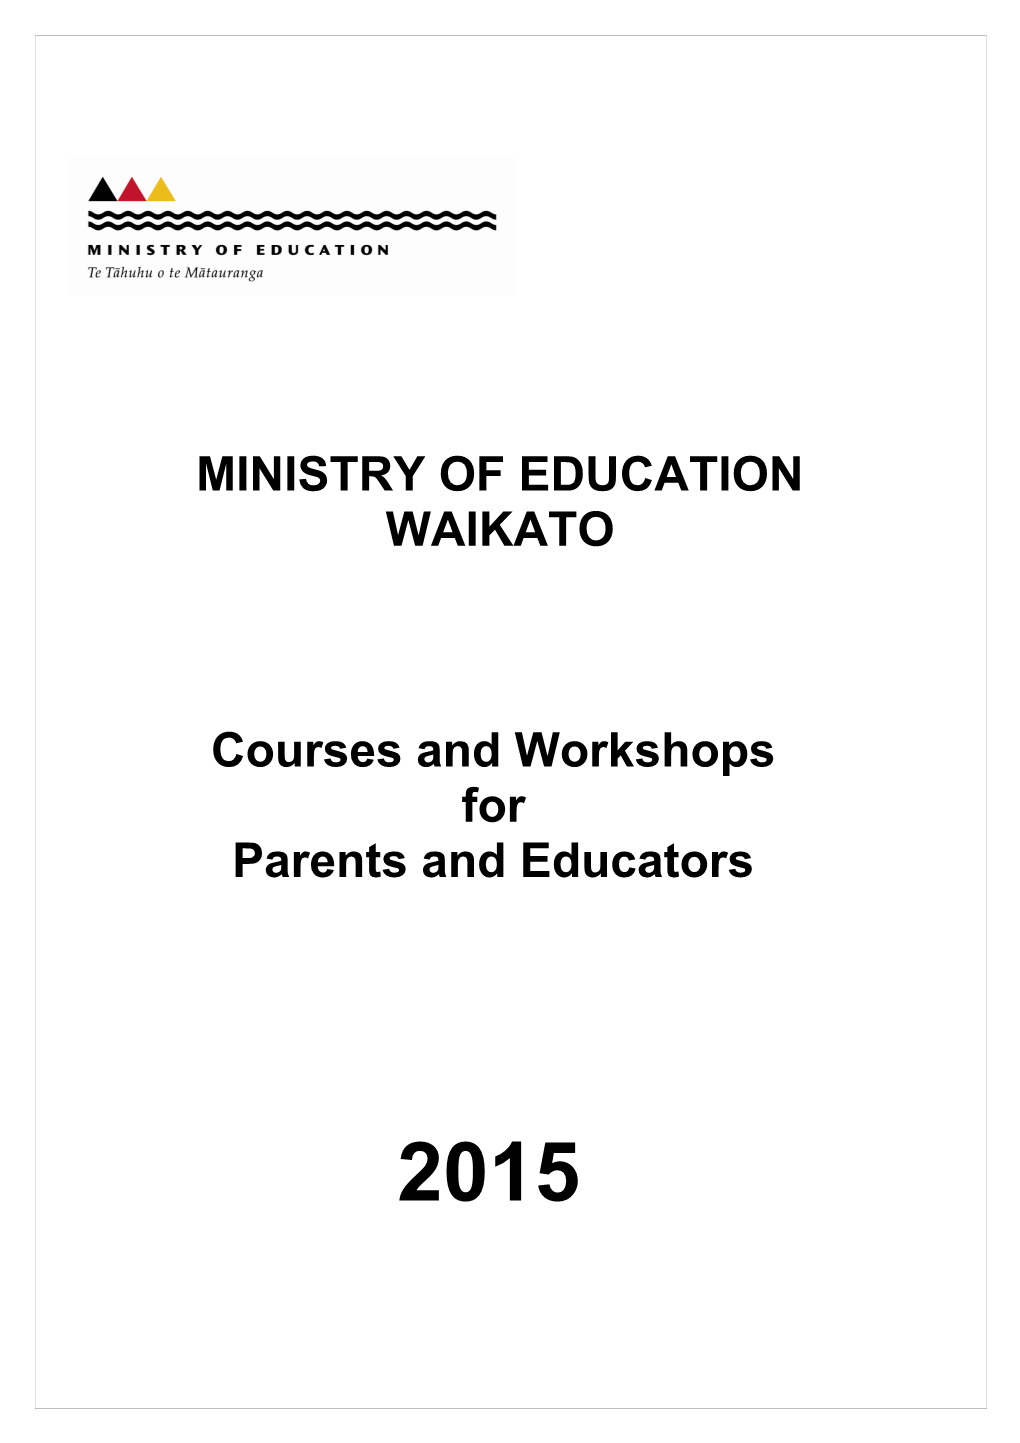 MOE Waikato Courses and Workshops for Parents and Educators